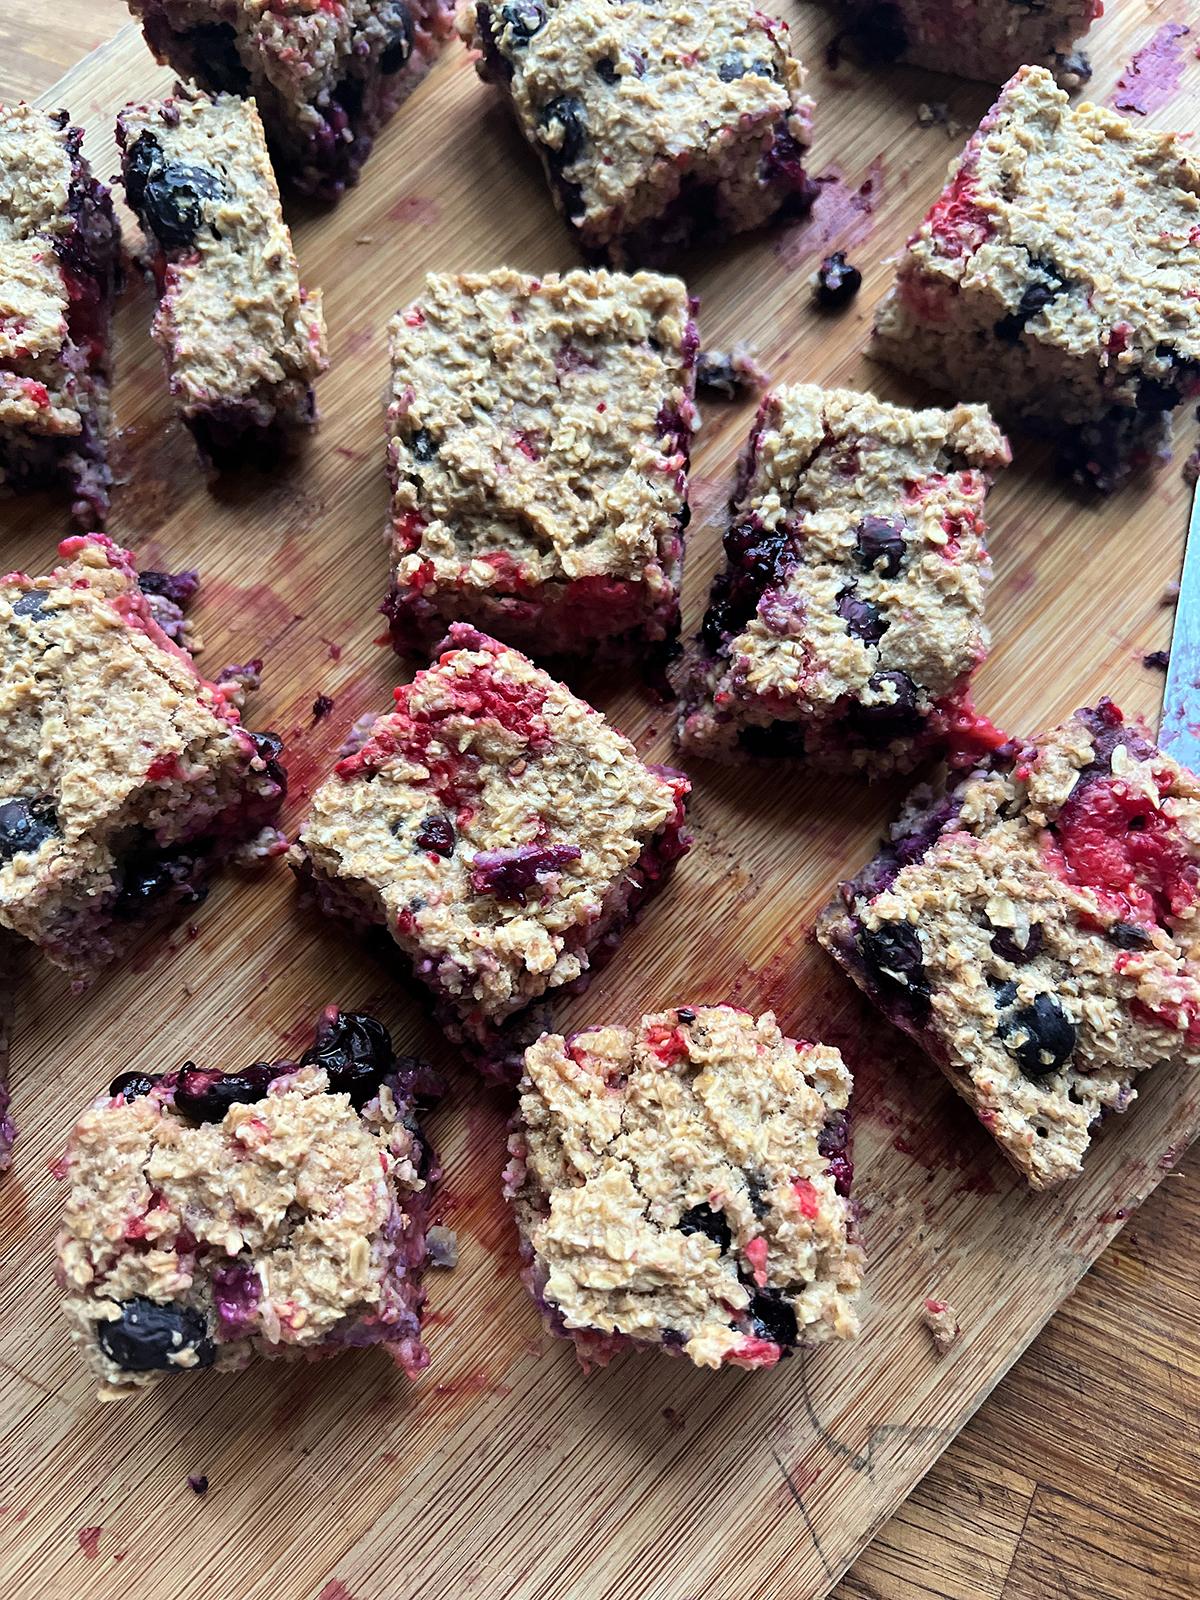 These energy-boosting breakfast bars are made with oats, which are packed with complex carbs. (Gretchen McKay/Pittsburgh Post-Gazette/TNS)